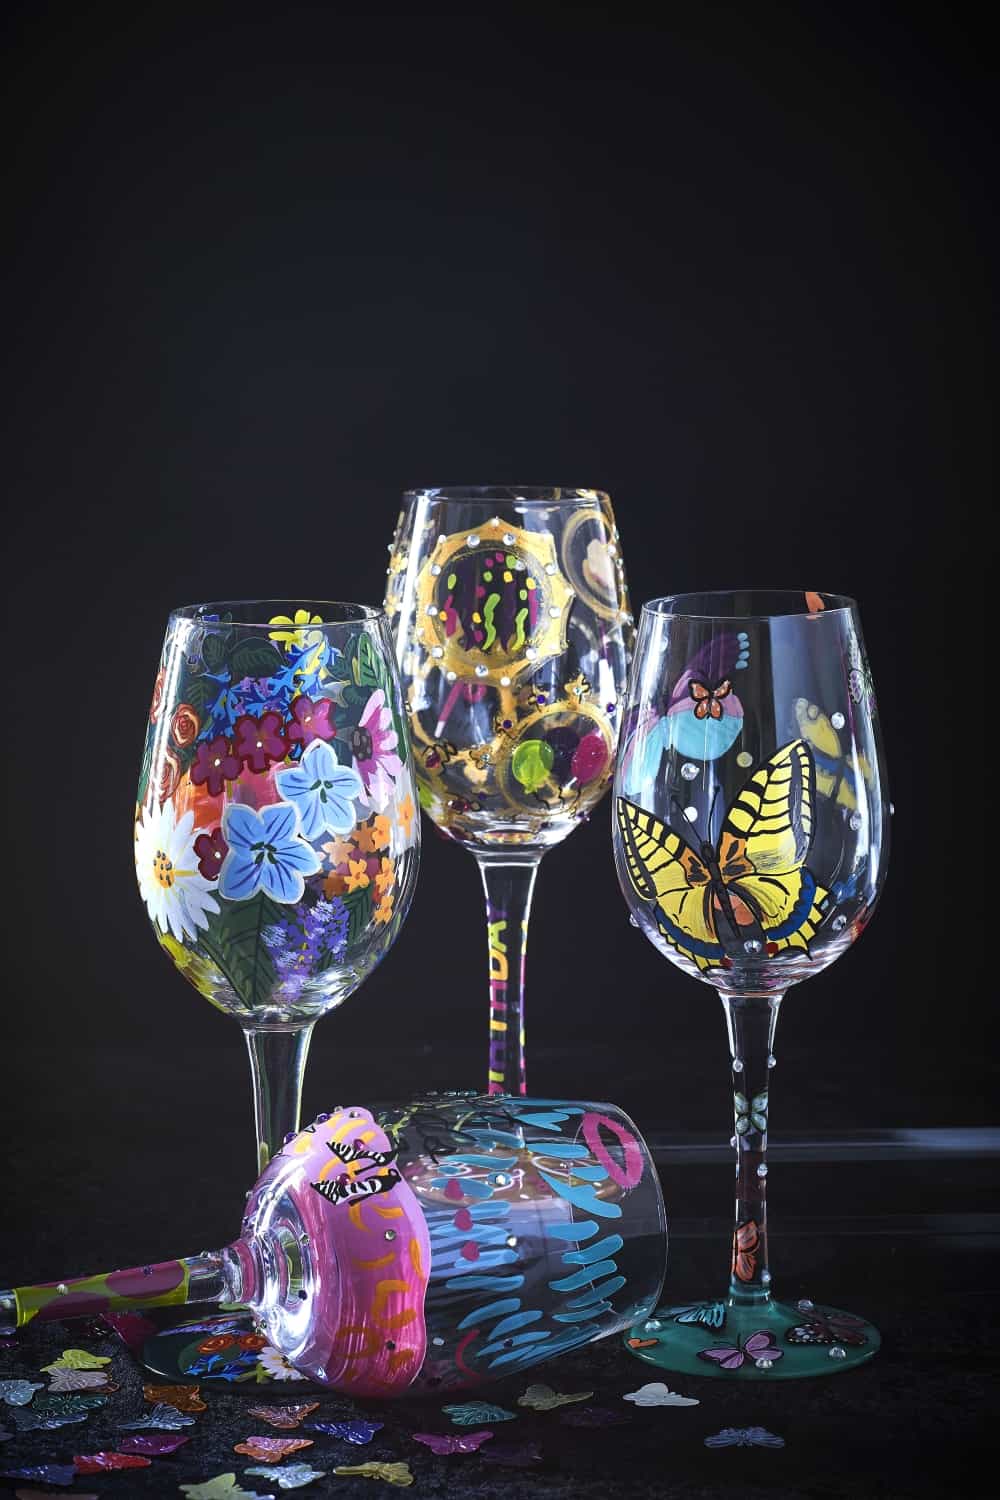 HAND PAINTED & BEJEWELED WINE GLASSES